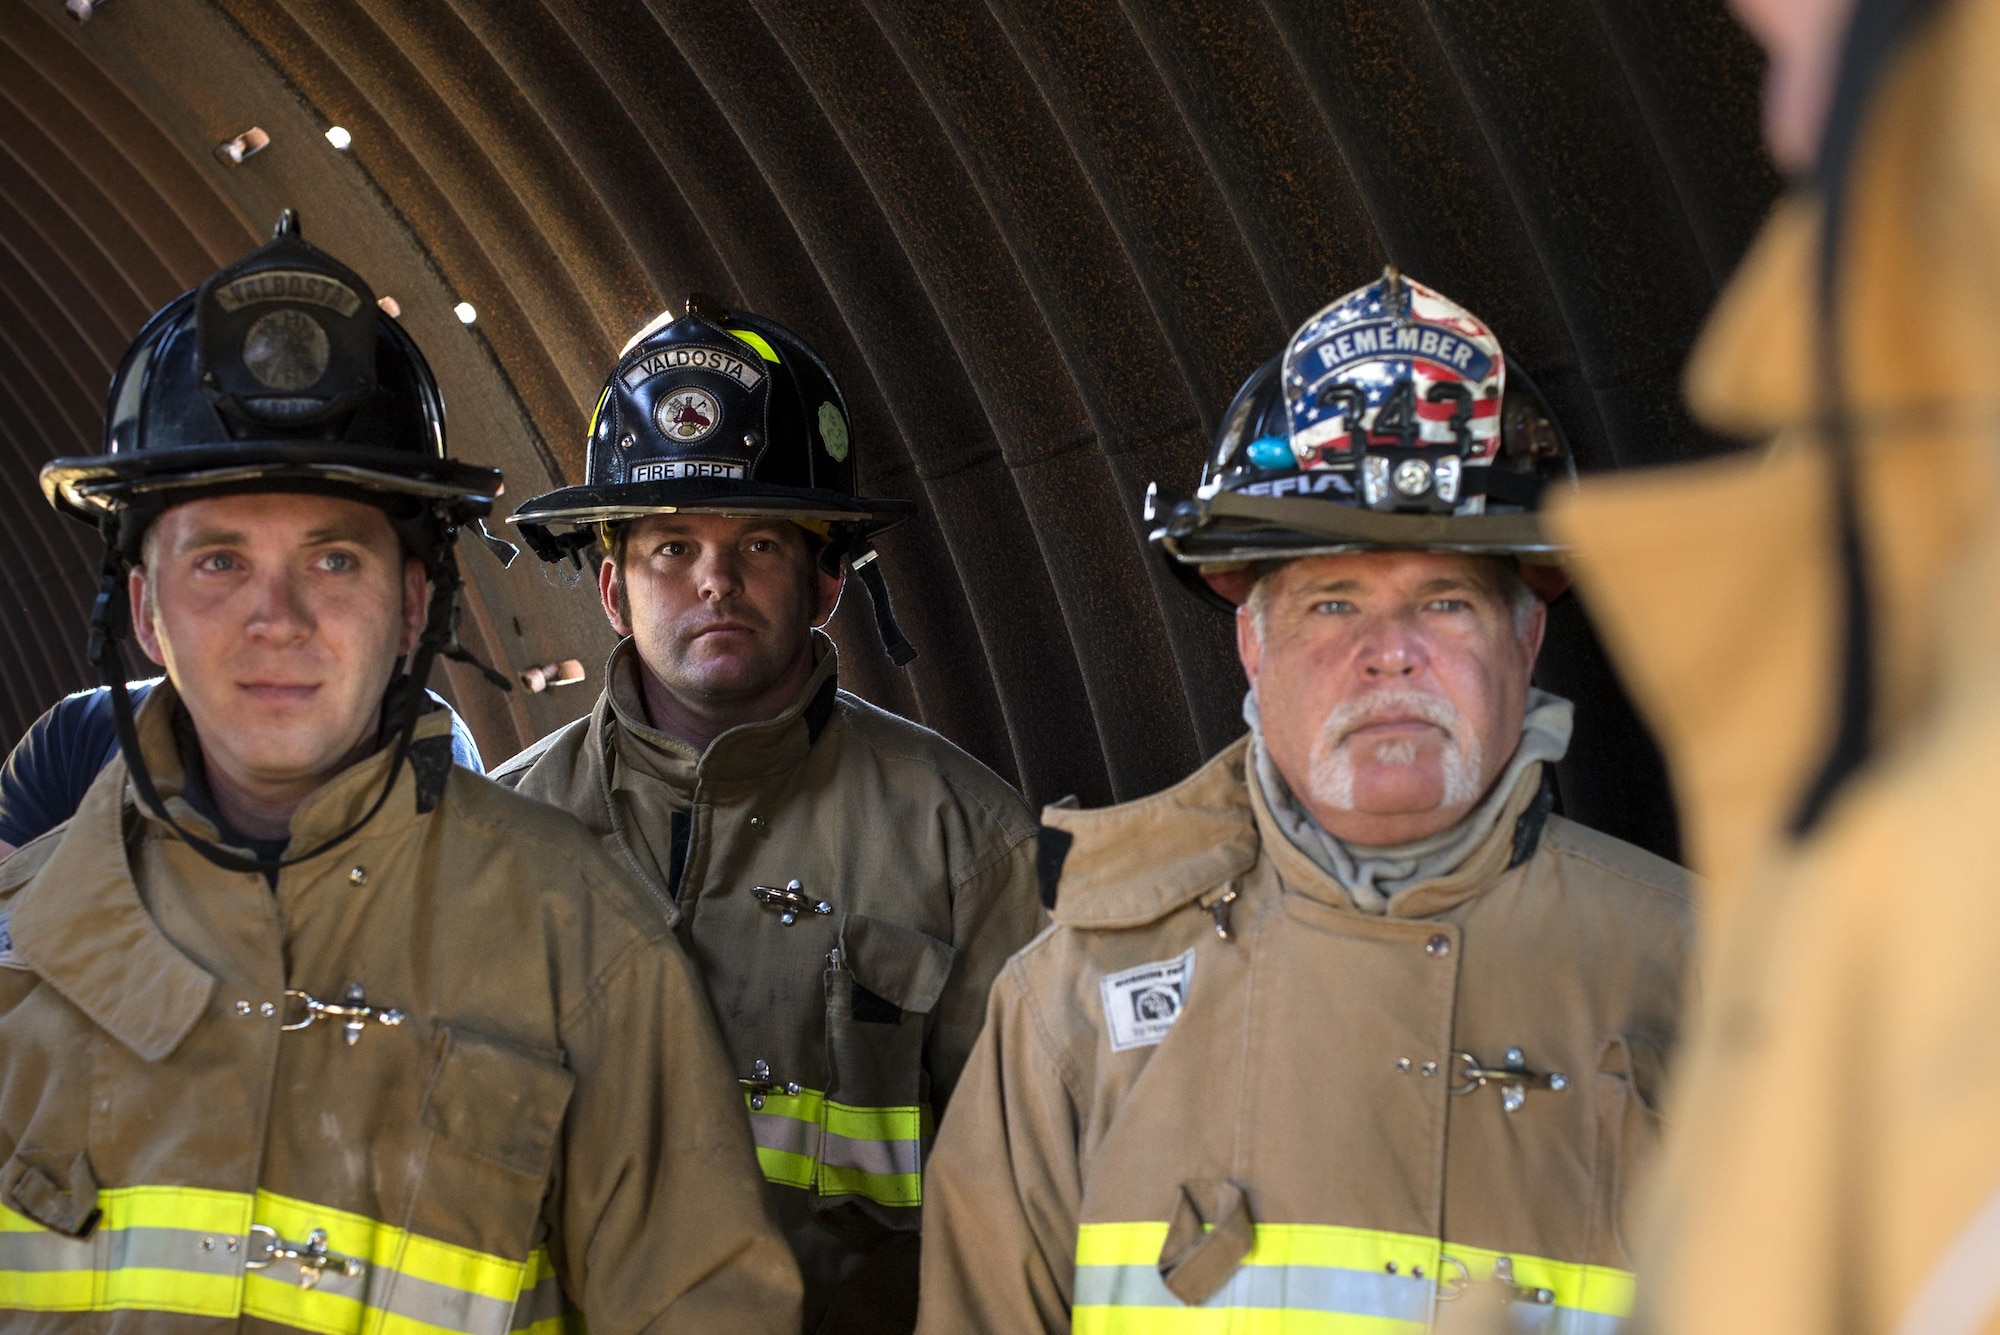 Firefighters from the Valdosta Fire Department listen to a mission brief during a walkthrough of the day’s events before aircraft live fire training April 26, 2016, at Moody Air Force Base, Ga. Firefighters were able to see the inside of the training prop and received guidance on where the sources of the fires were, and what type of techniques to use while putting them out. (U.S. Air Force photo by Airman 1st Class Janiqua P. Robinson/Released)